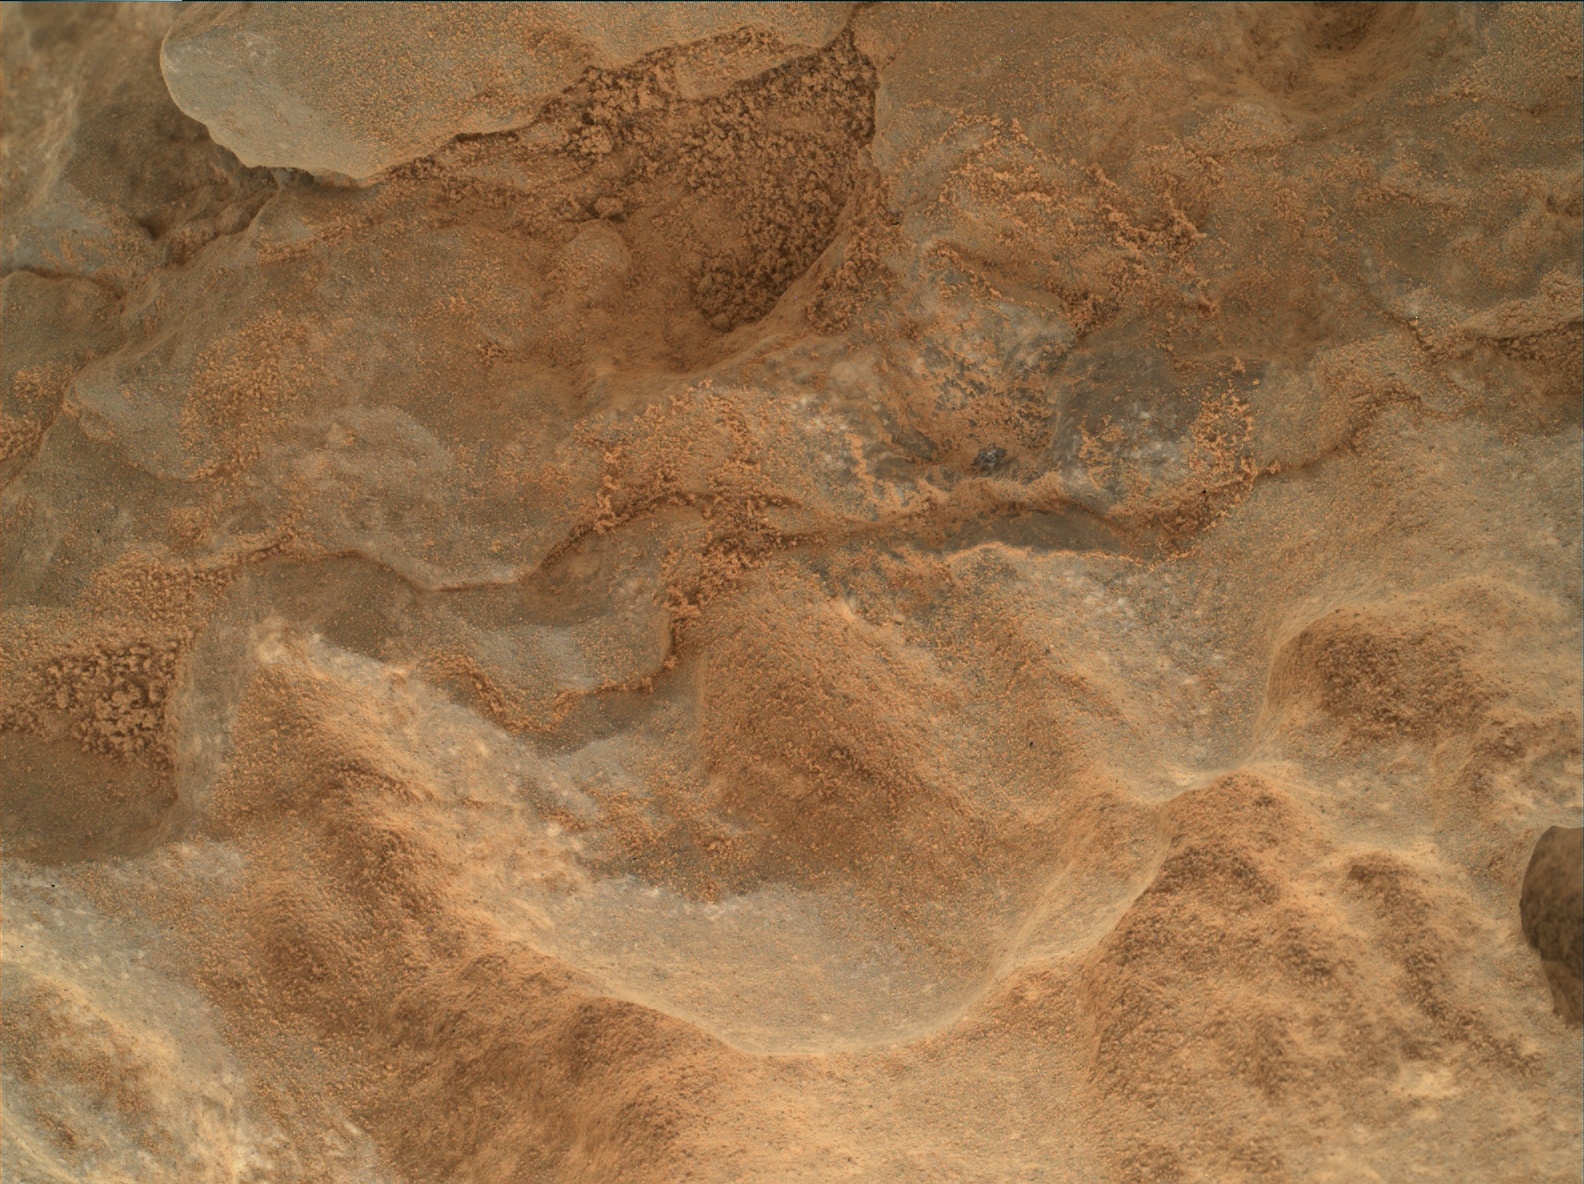 Nasa's Mars rover Curiosity acquired this image using its Mars Hand Lens Imager (MAHLI) on Sol 688